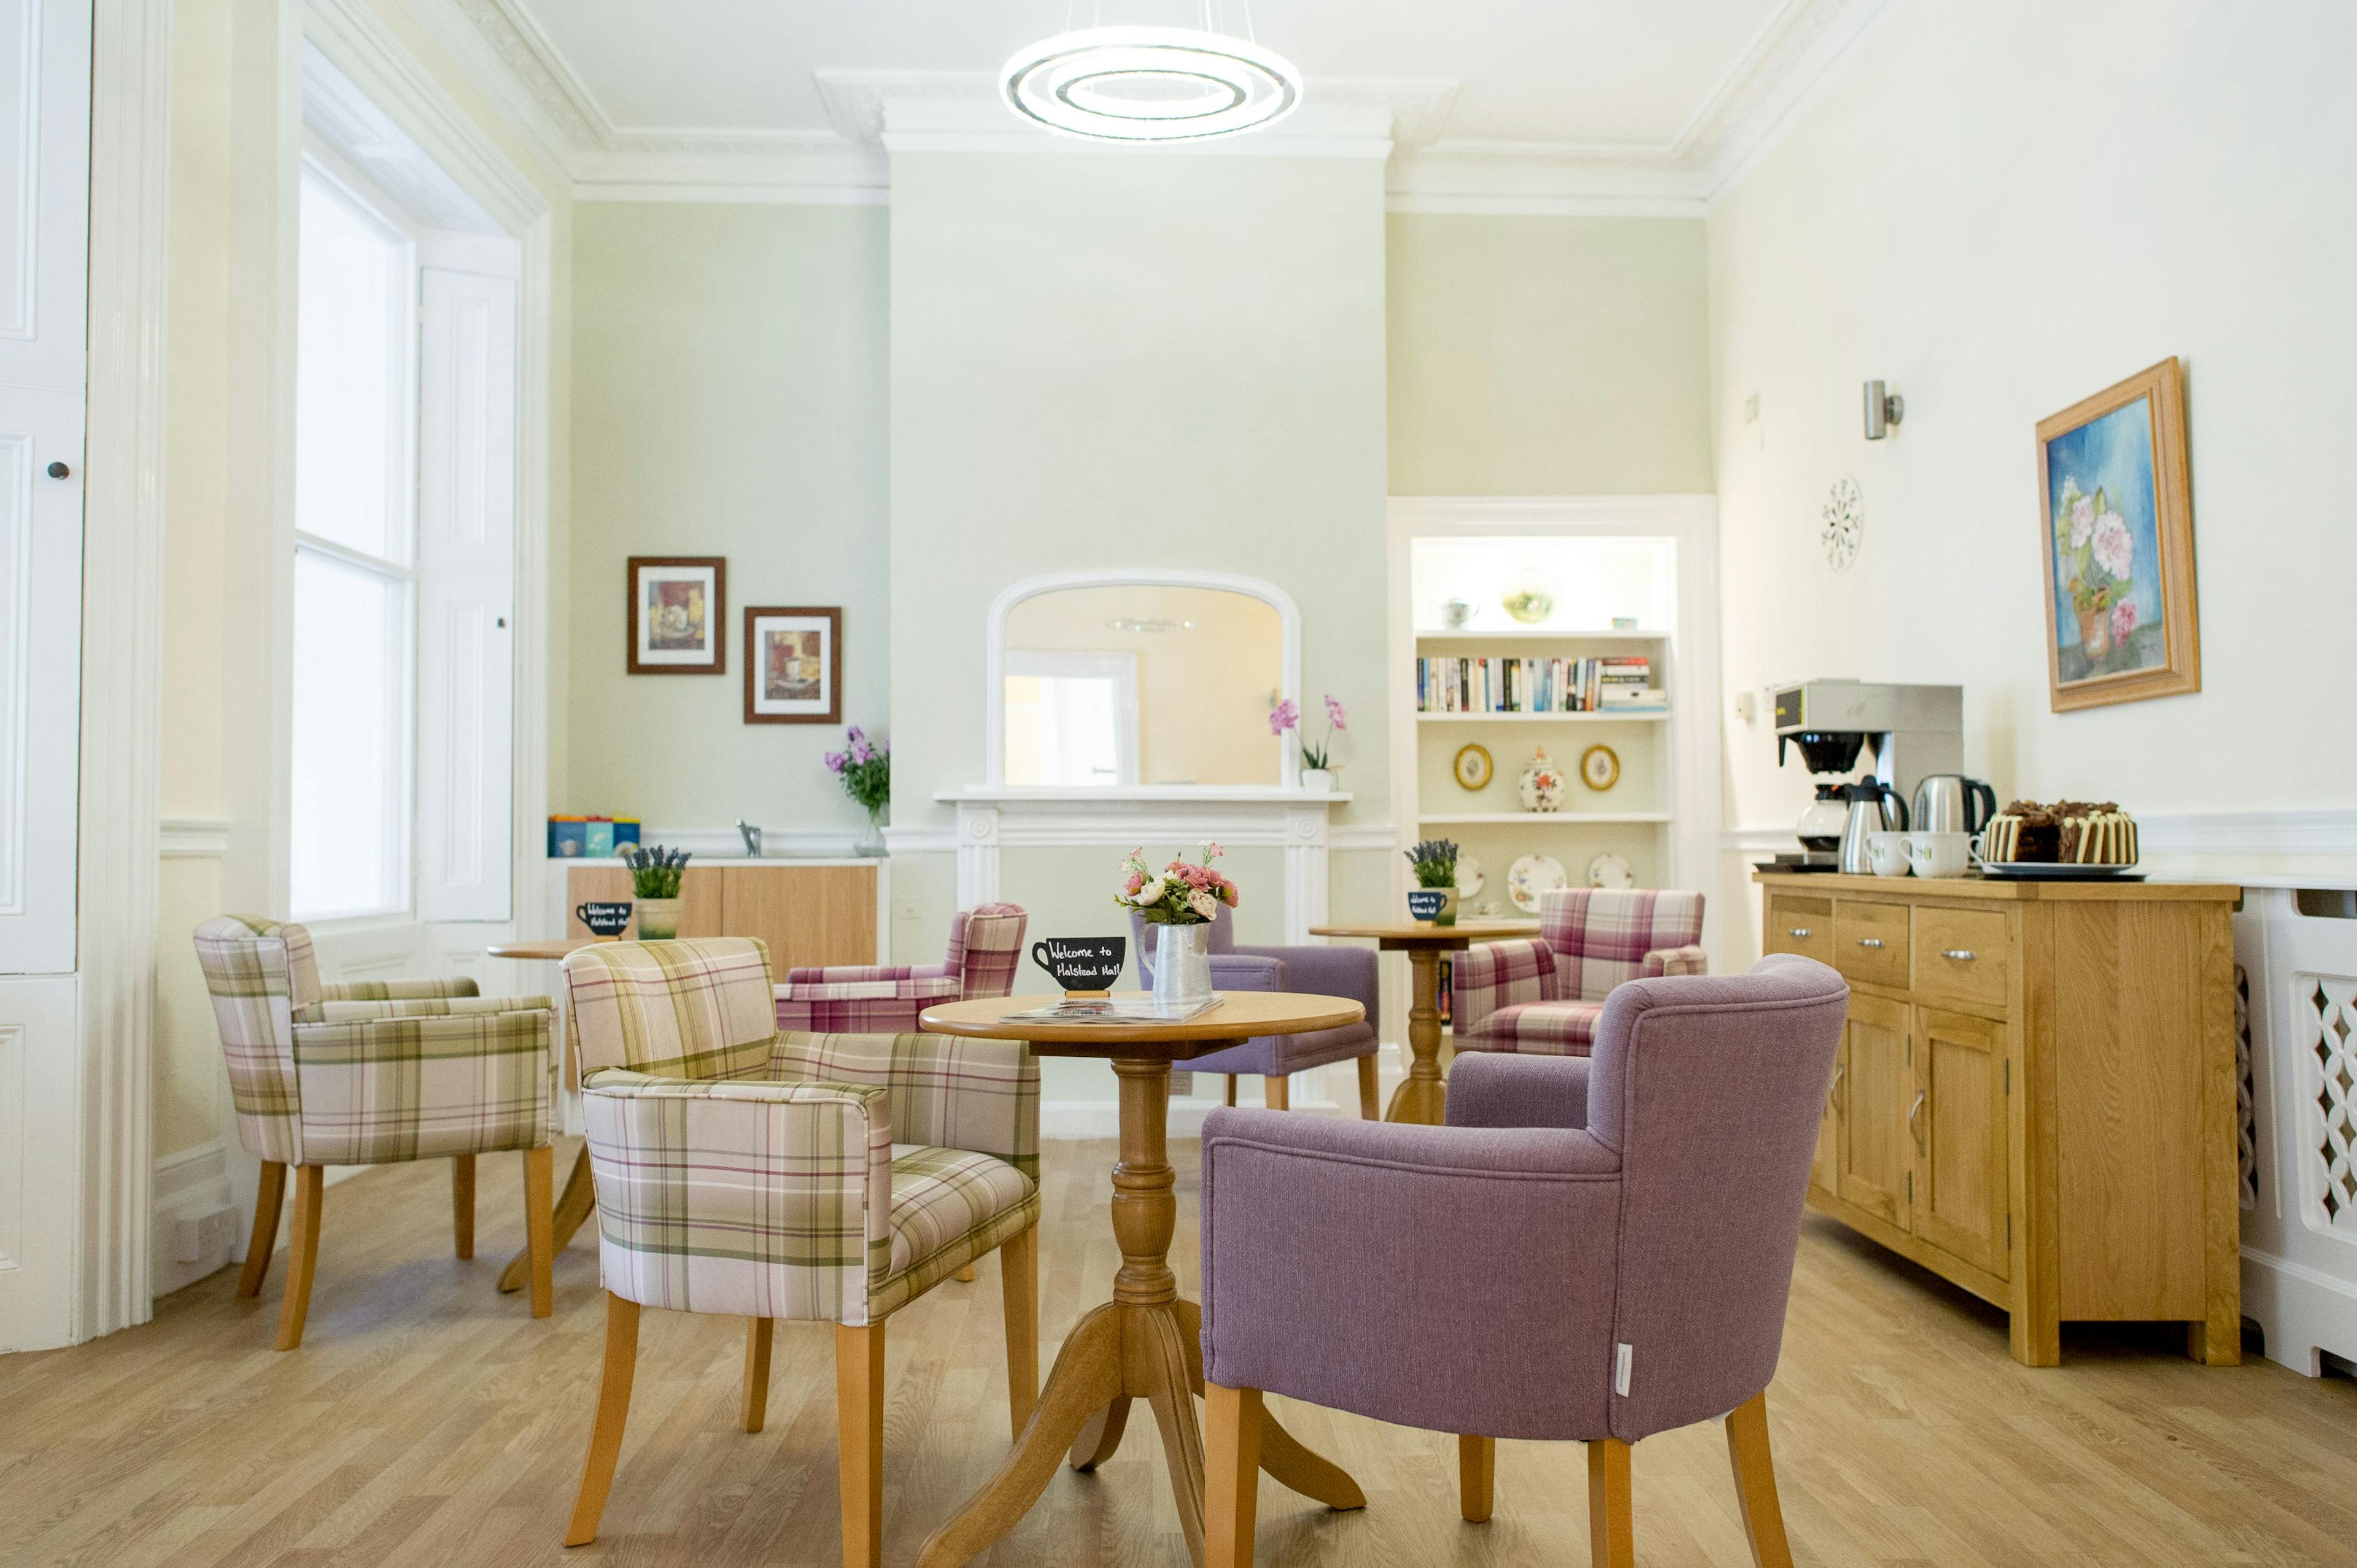 Dining room of Halstead Hall care home in Braintree, Essex